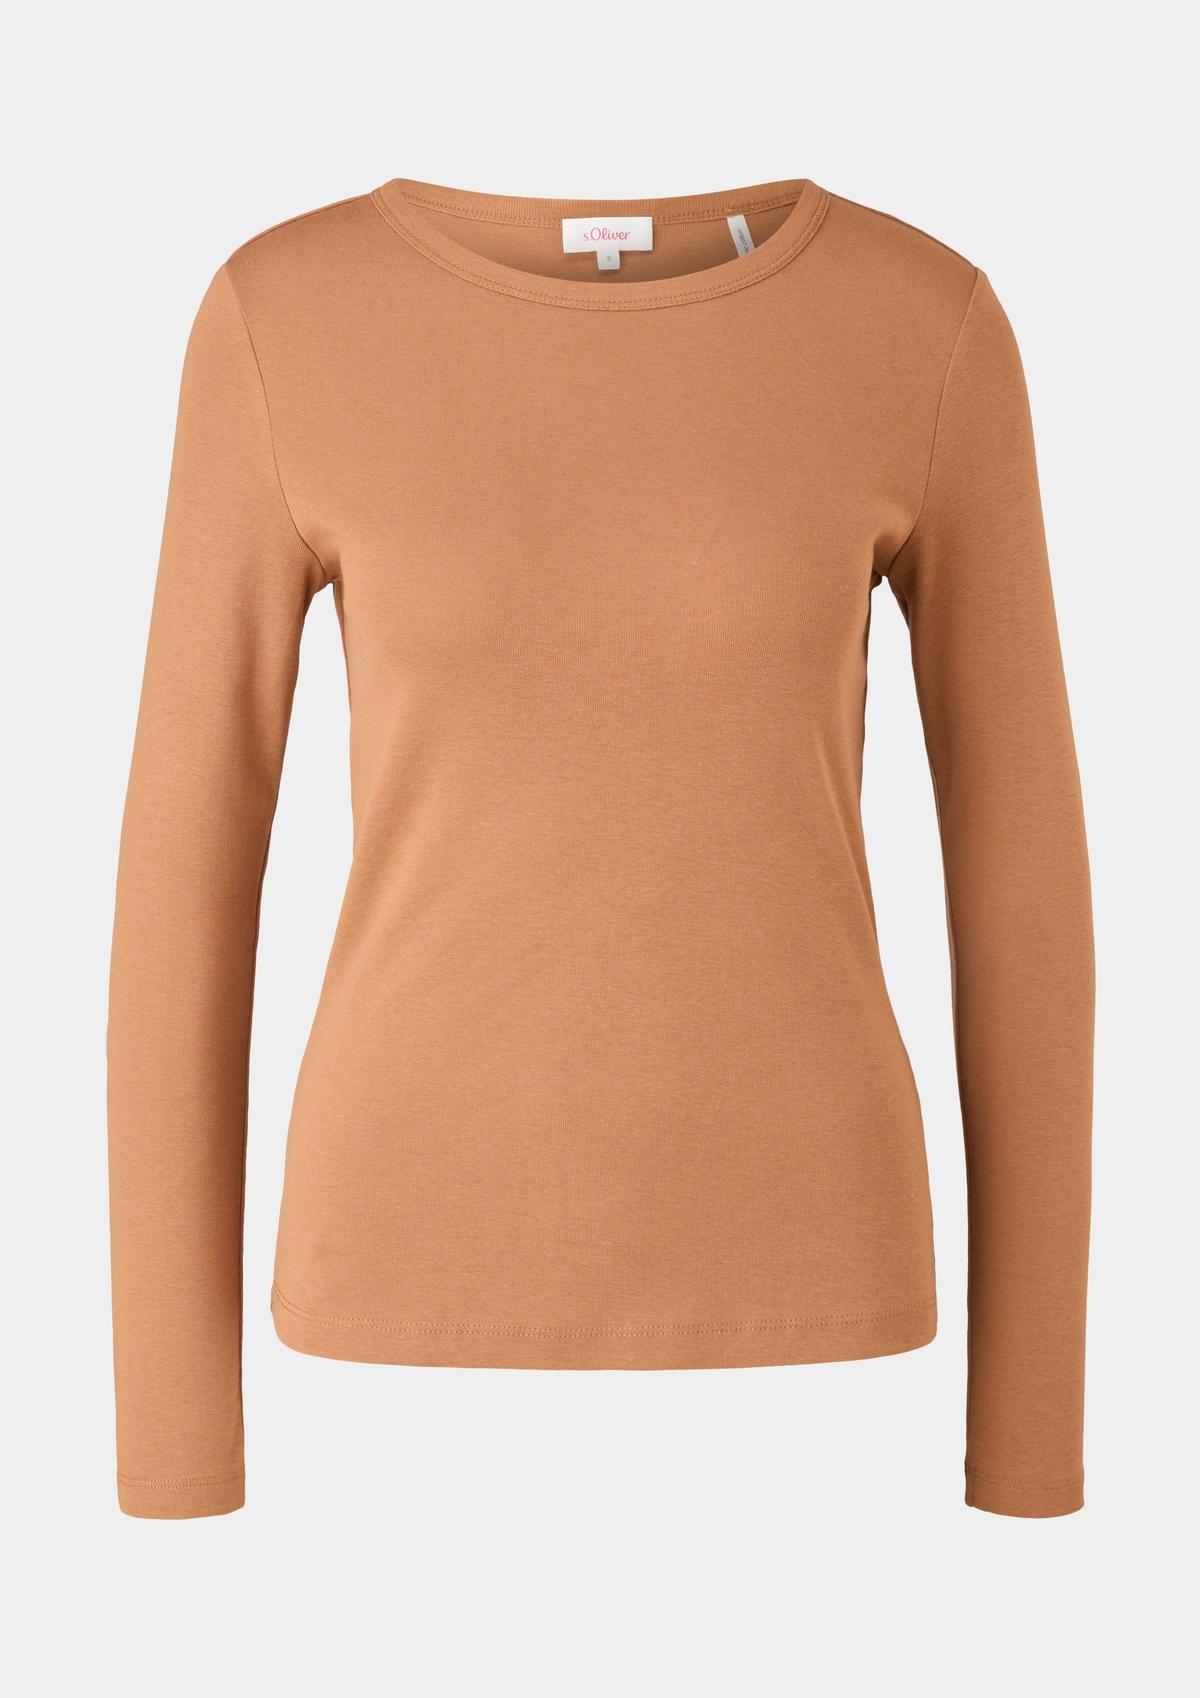 s.Oliver Long sleeve cotton jersey top